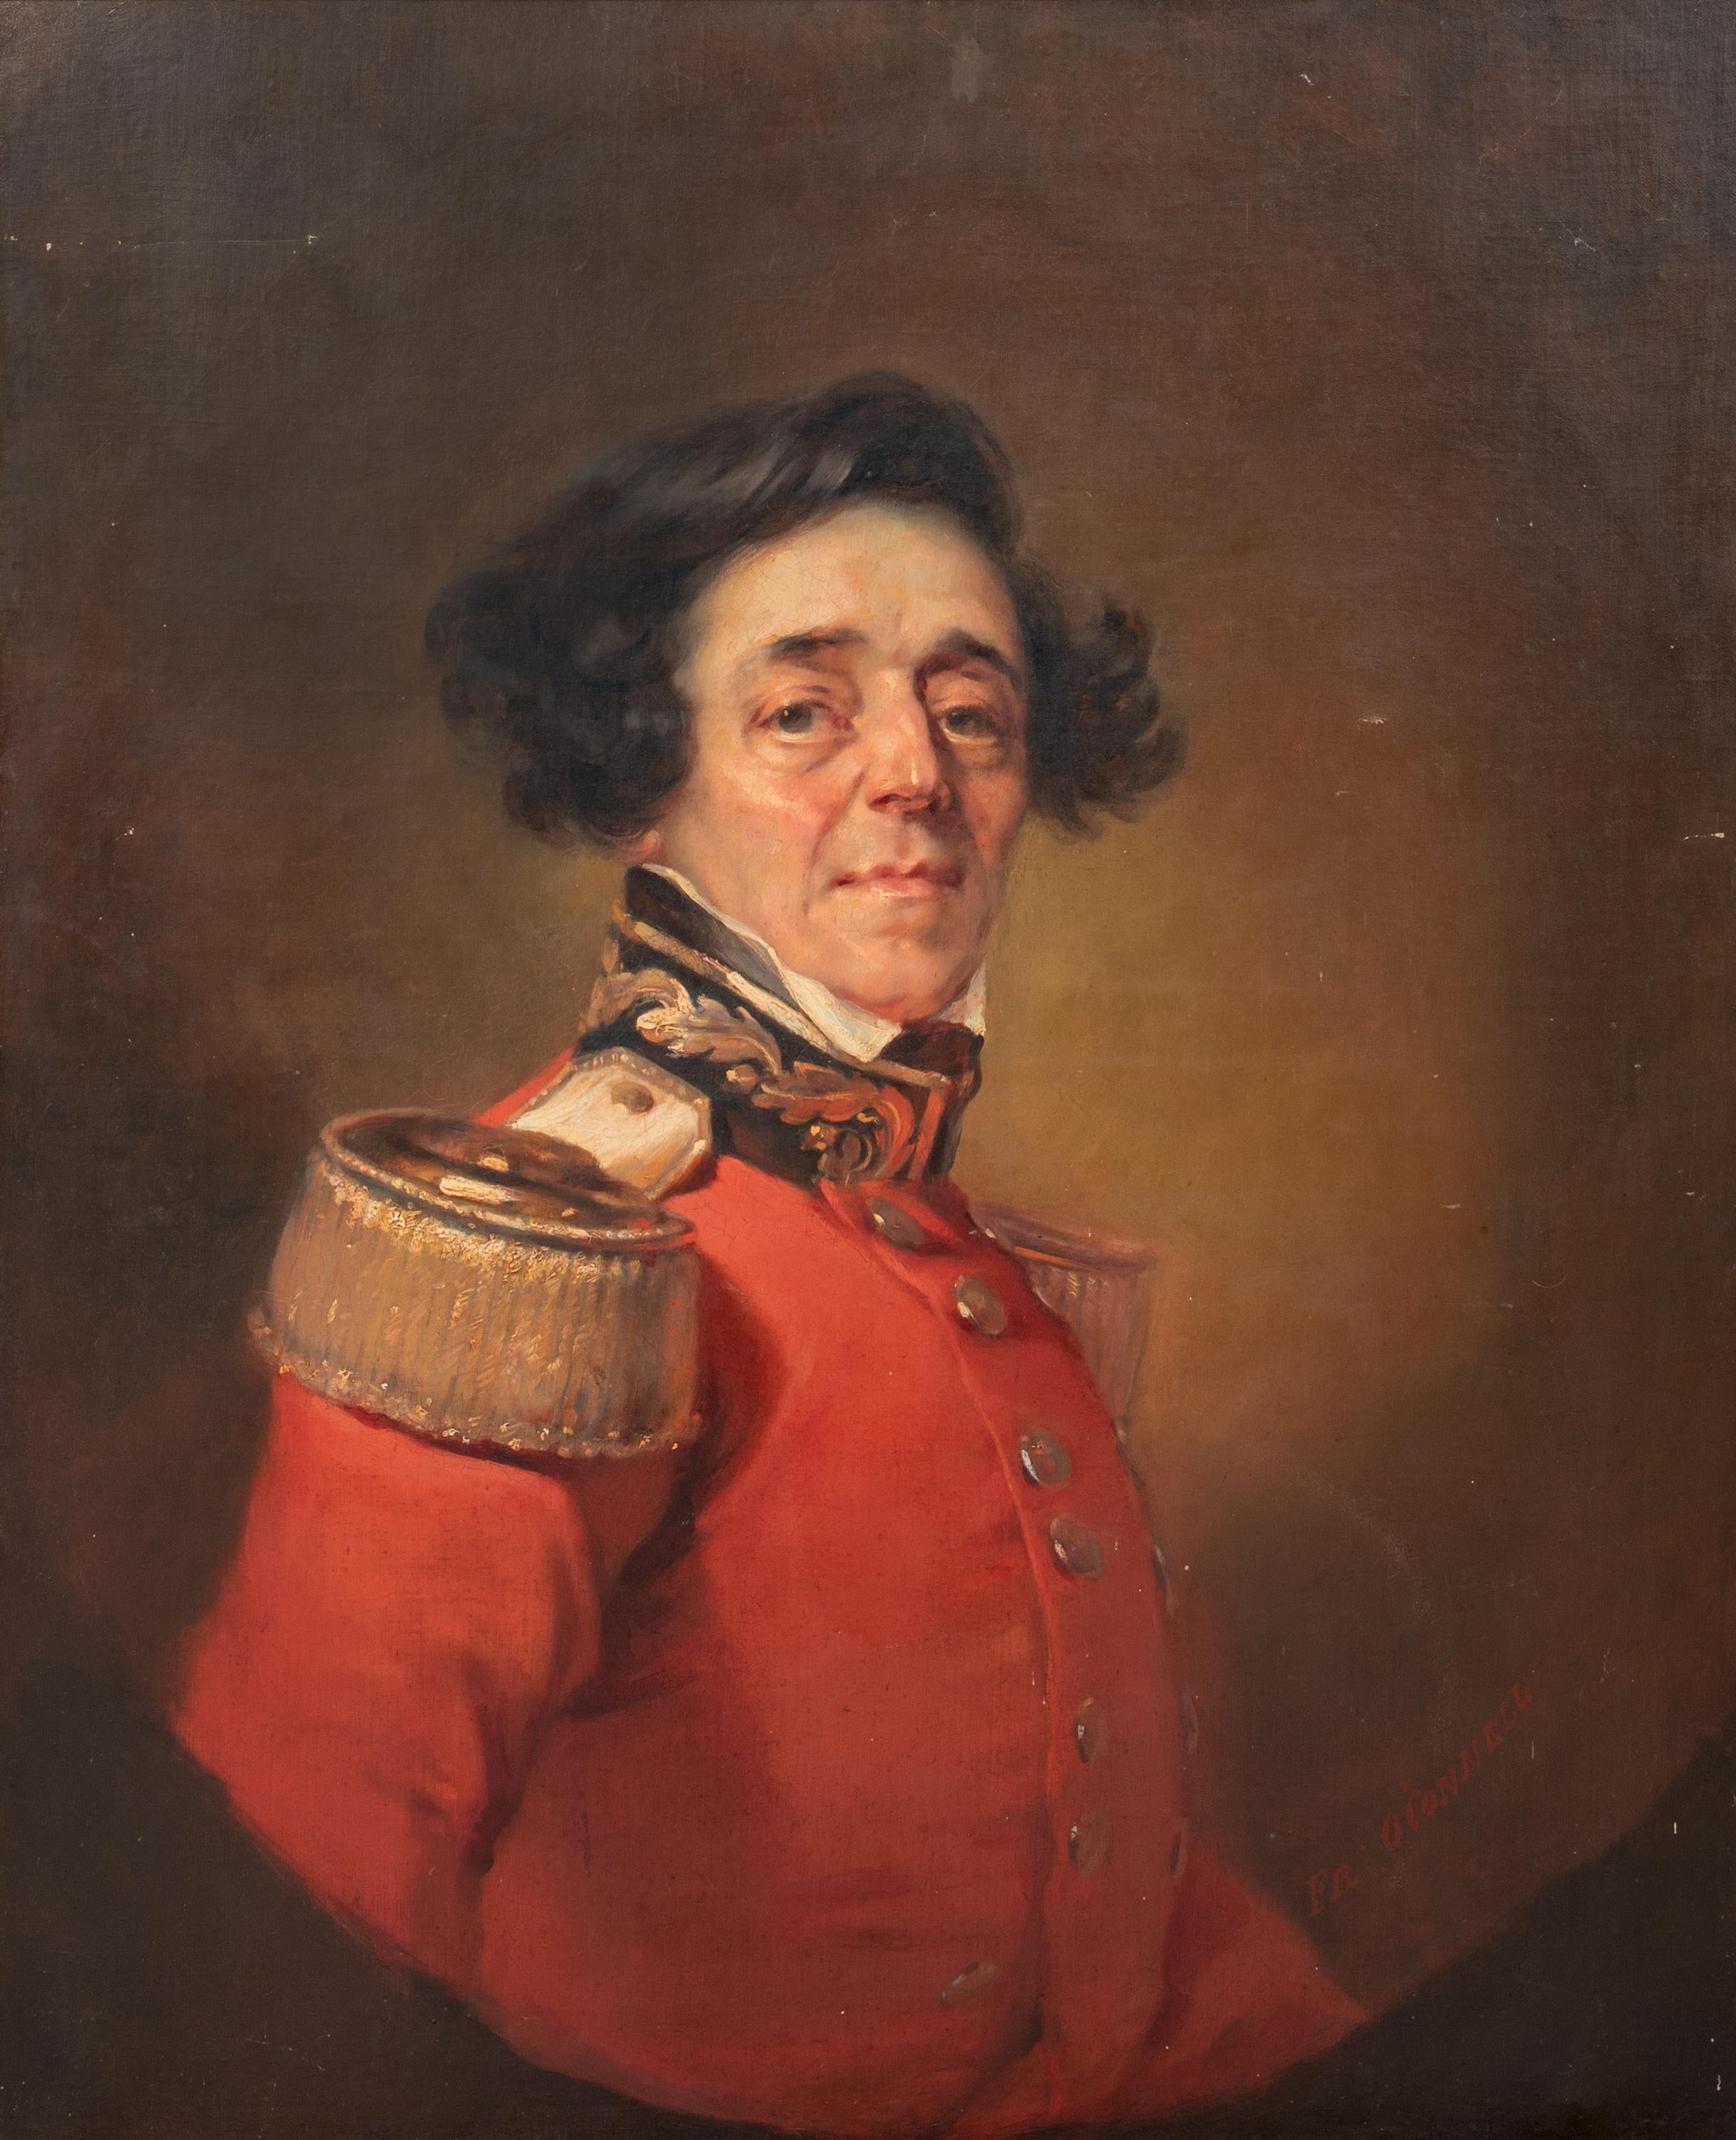 Portrait Colonel Edward Astley 1st Royal Life Guards, 19th Century

by Frederique Emile O'Connell (1823-1885)
Large 19th Century Portrait of Colonel Edward Astley, 1st Royal Life Guards, oil on canvas by Frederique Emile O'Connell. Excellent quality